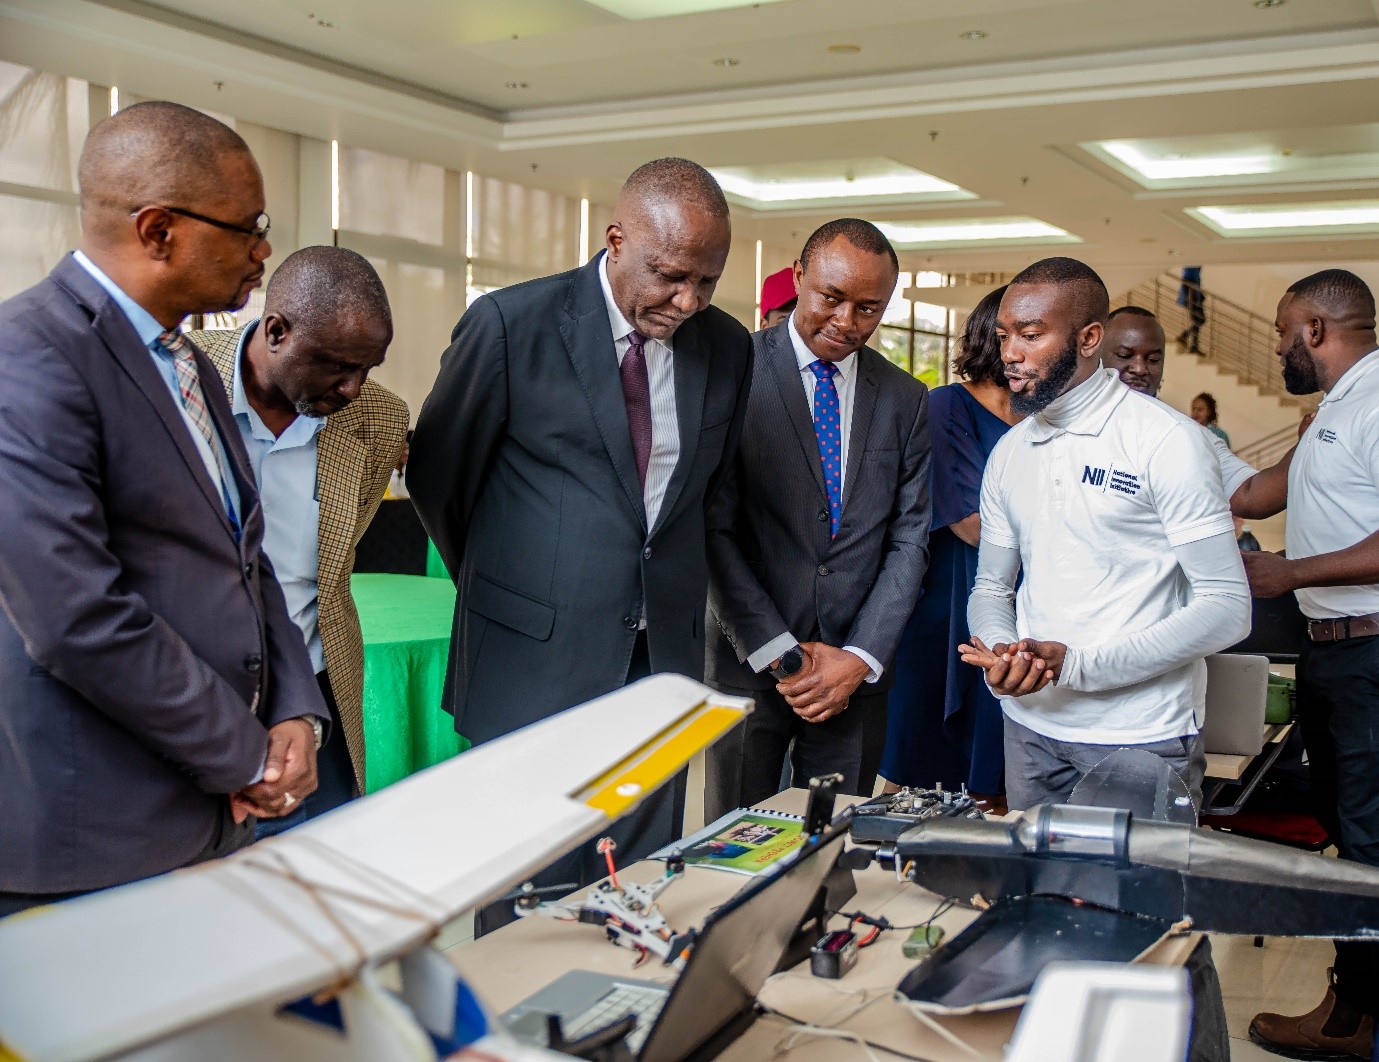 An image of Honourable Minister of Technology and Science, Felix Mutati (centre) flanked by other dignitaries, on his immediate left is the UNDP Assistant Resident Representative, Gregory Saili during the tour of Innovation Stands at the 2022 Innovation Award Ceremony, held at Government Complex.